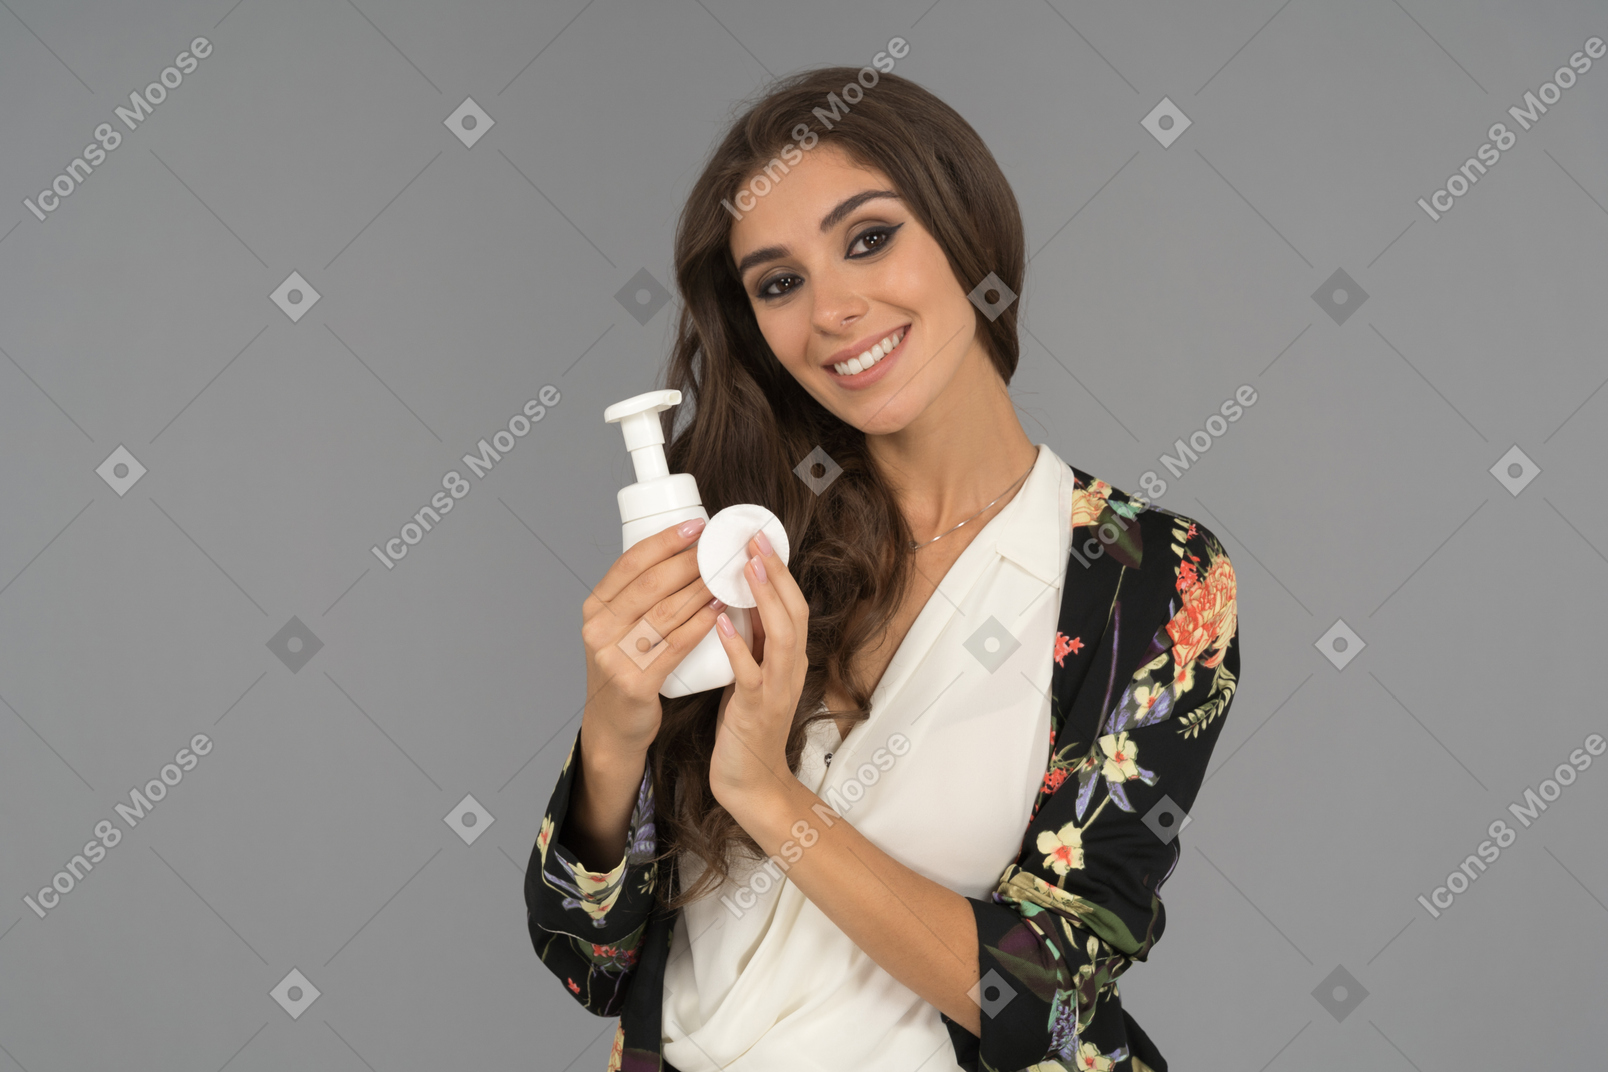 A beautiful woman with a radiant smile advertising a new beauty product